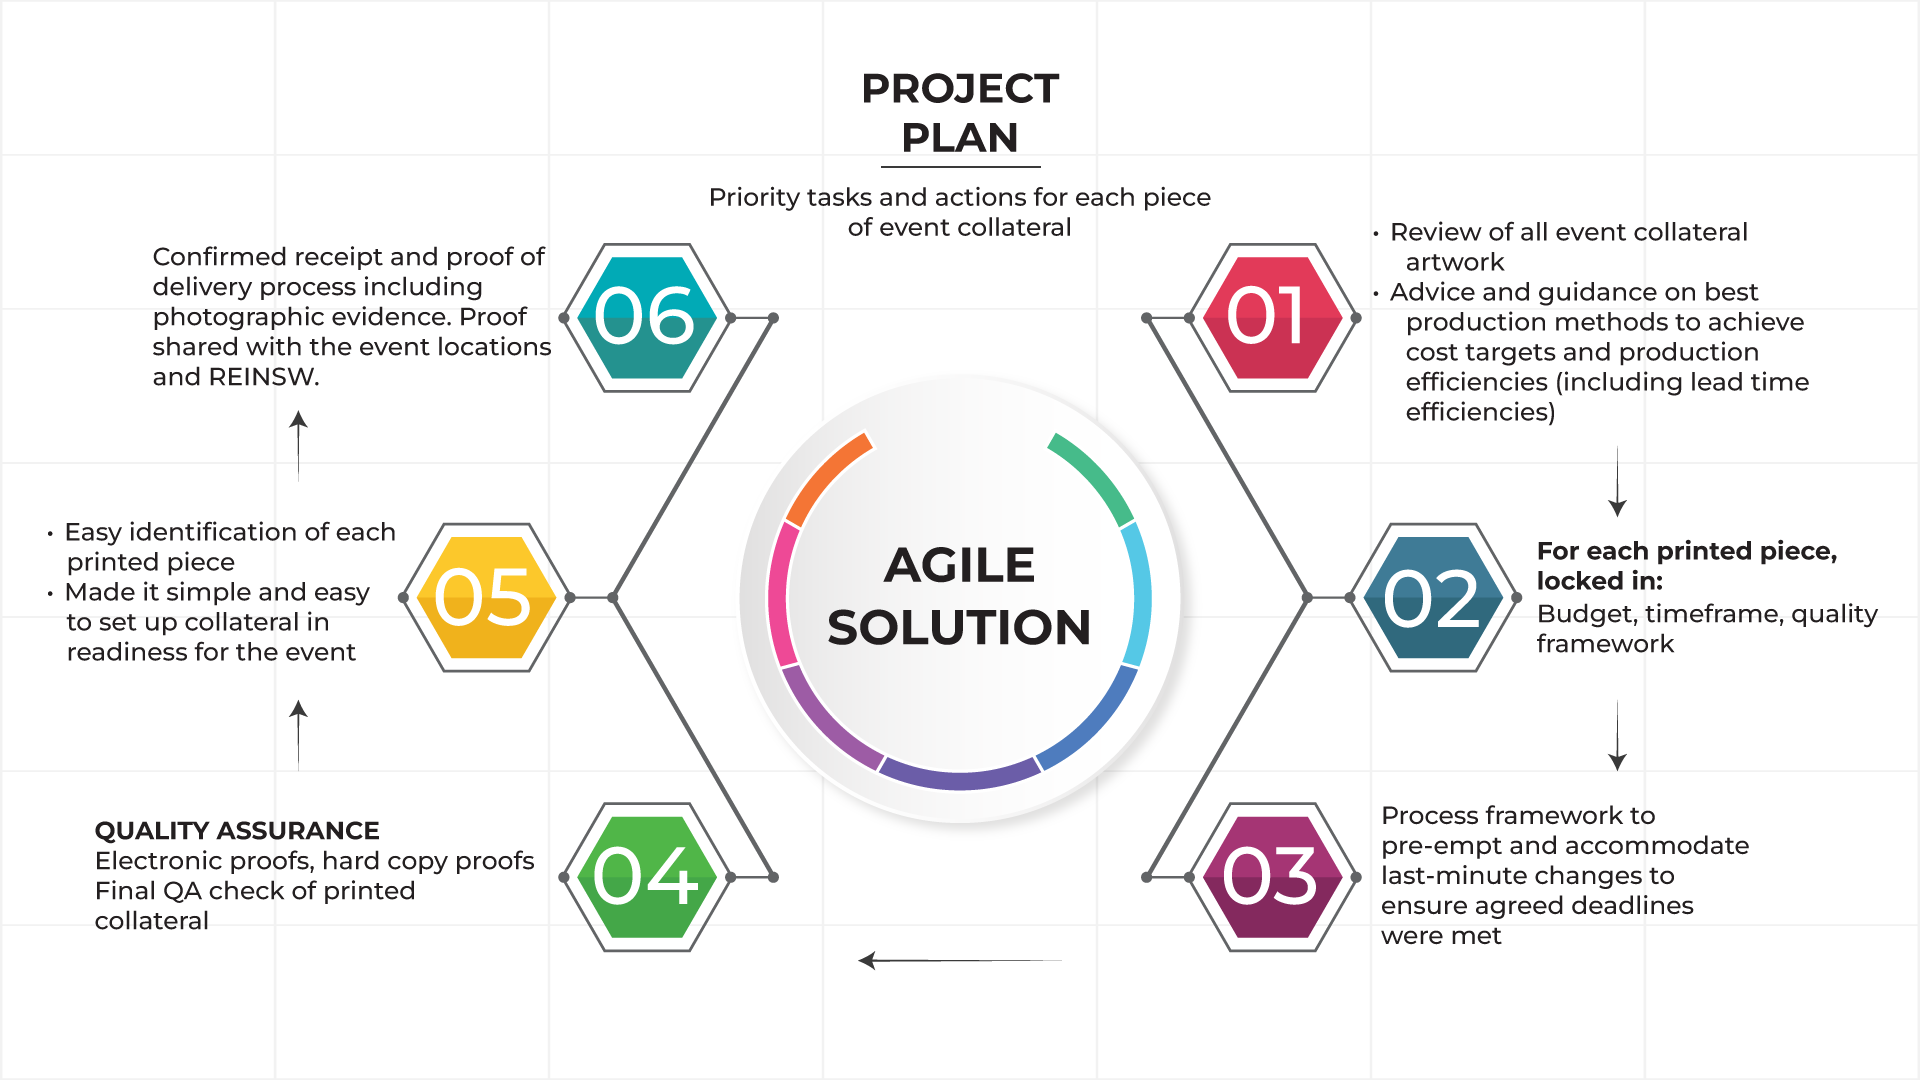 reasons why REINSW appointed Agile Print Media